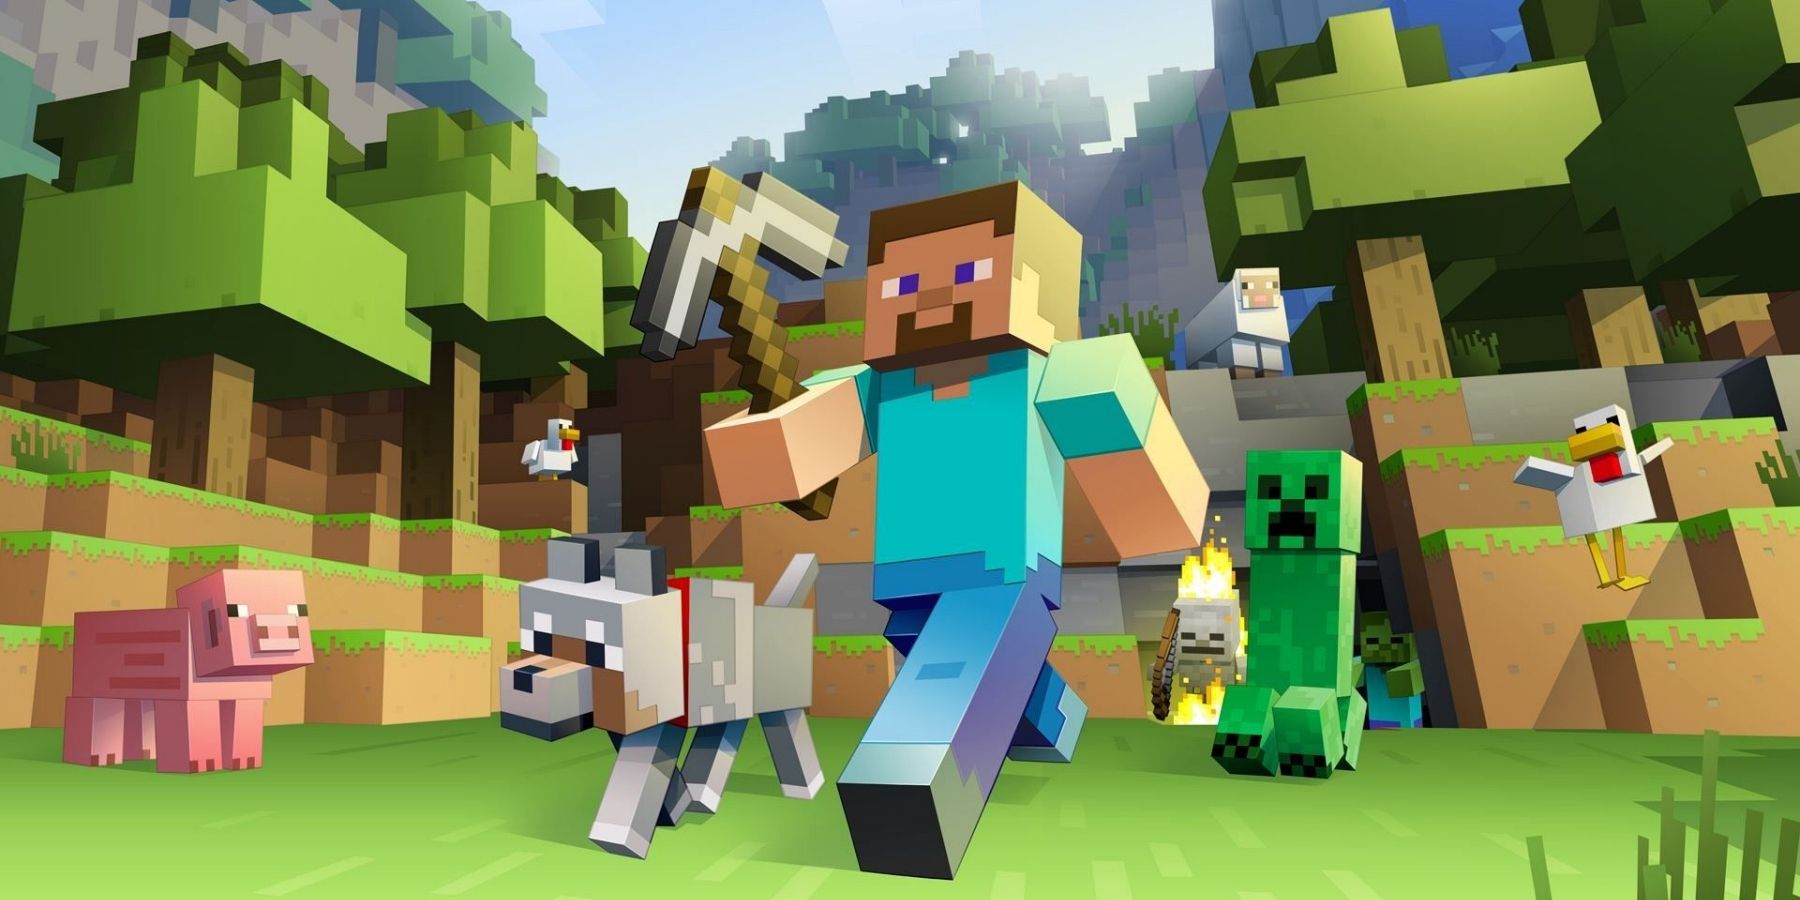 Minecraft Promo Image - Steve and the mobs in-game